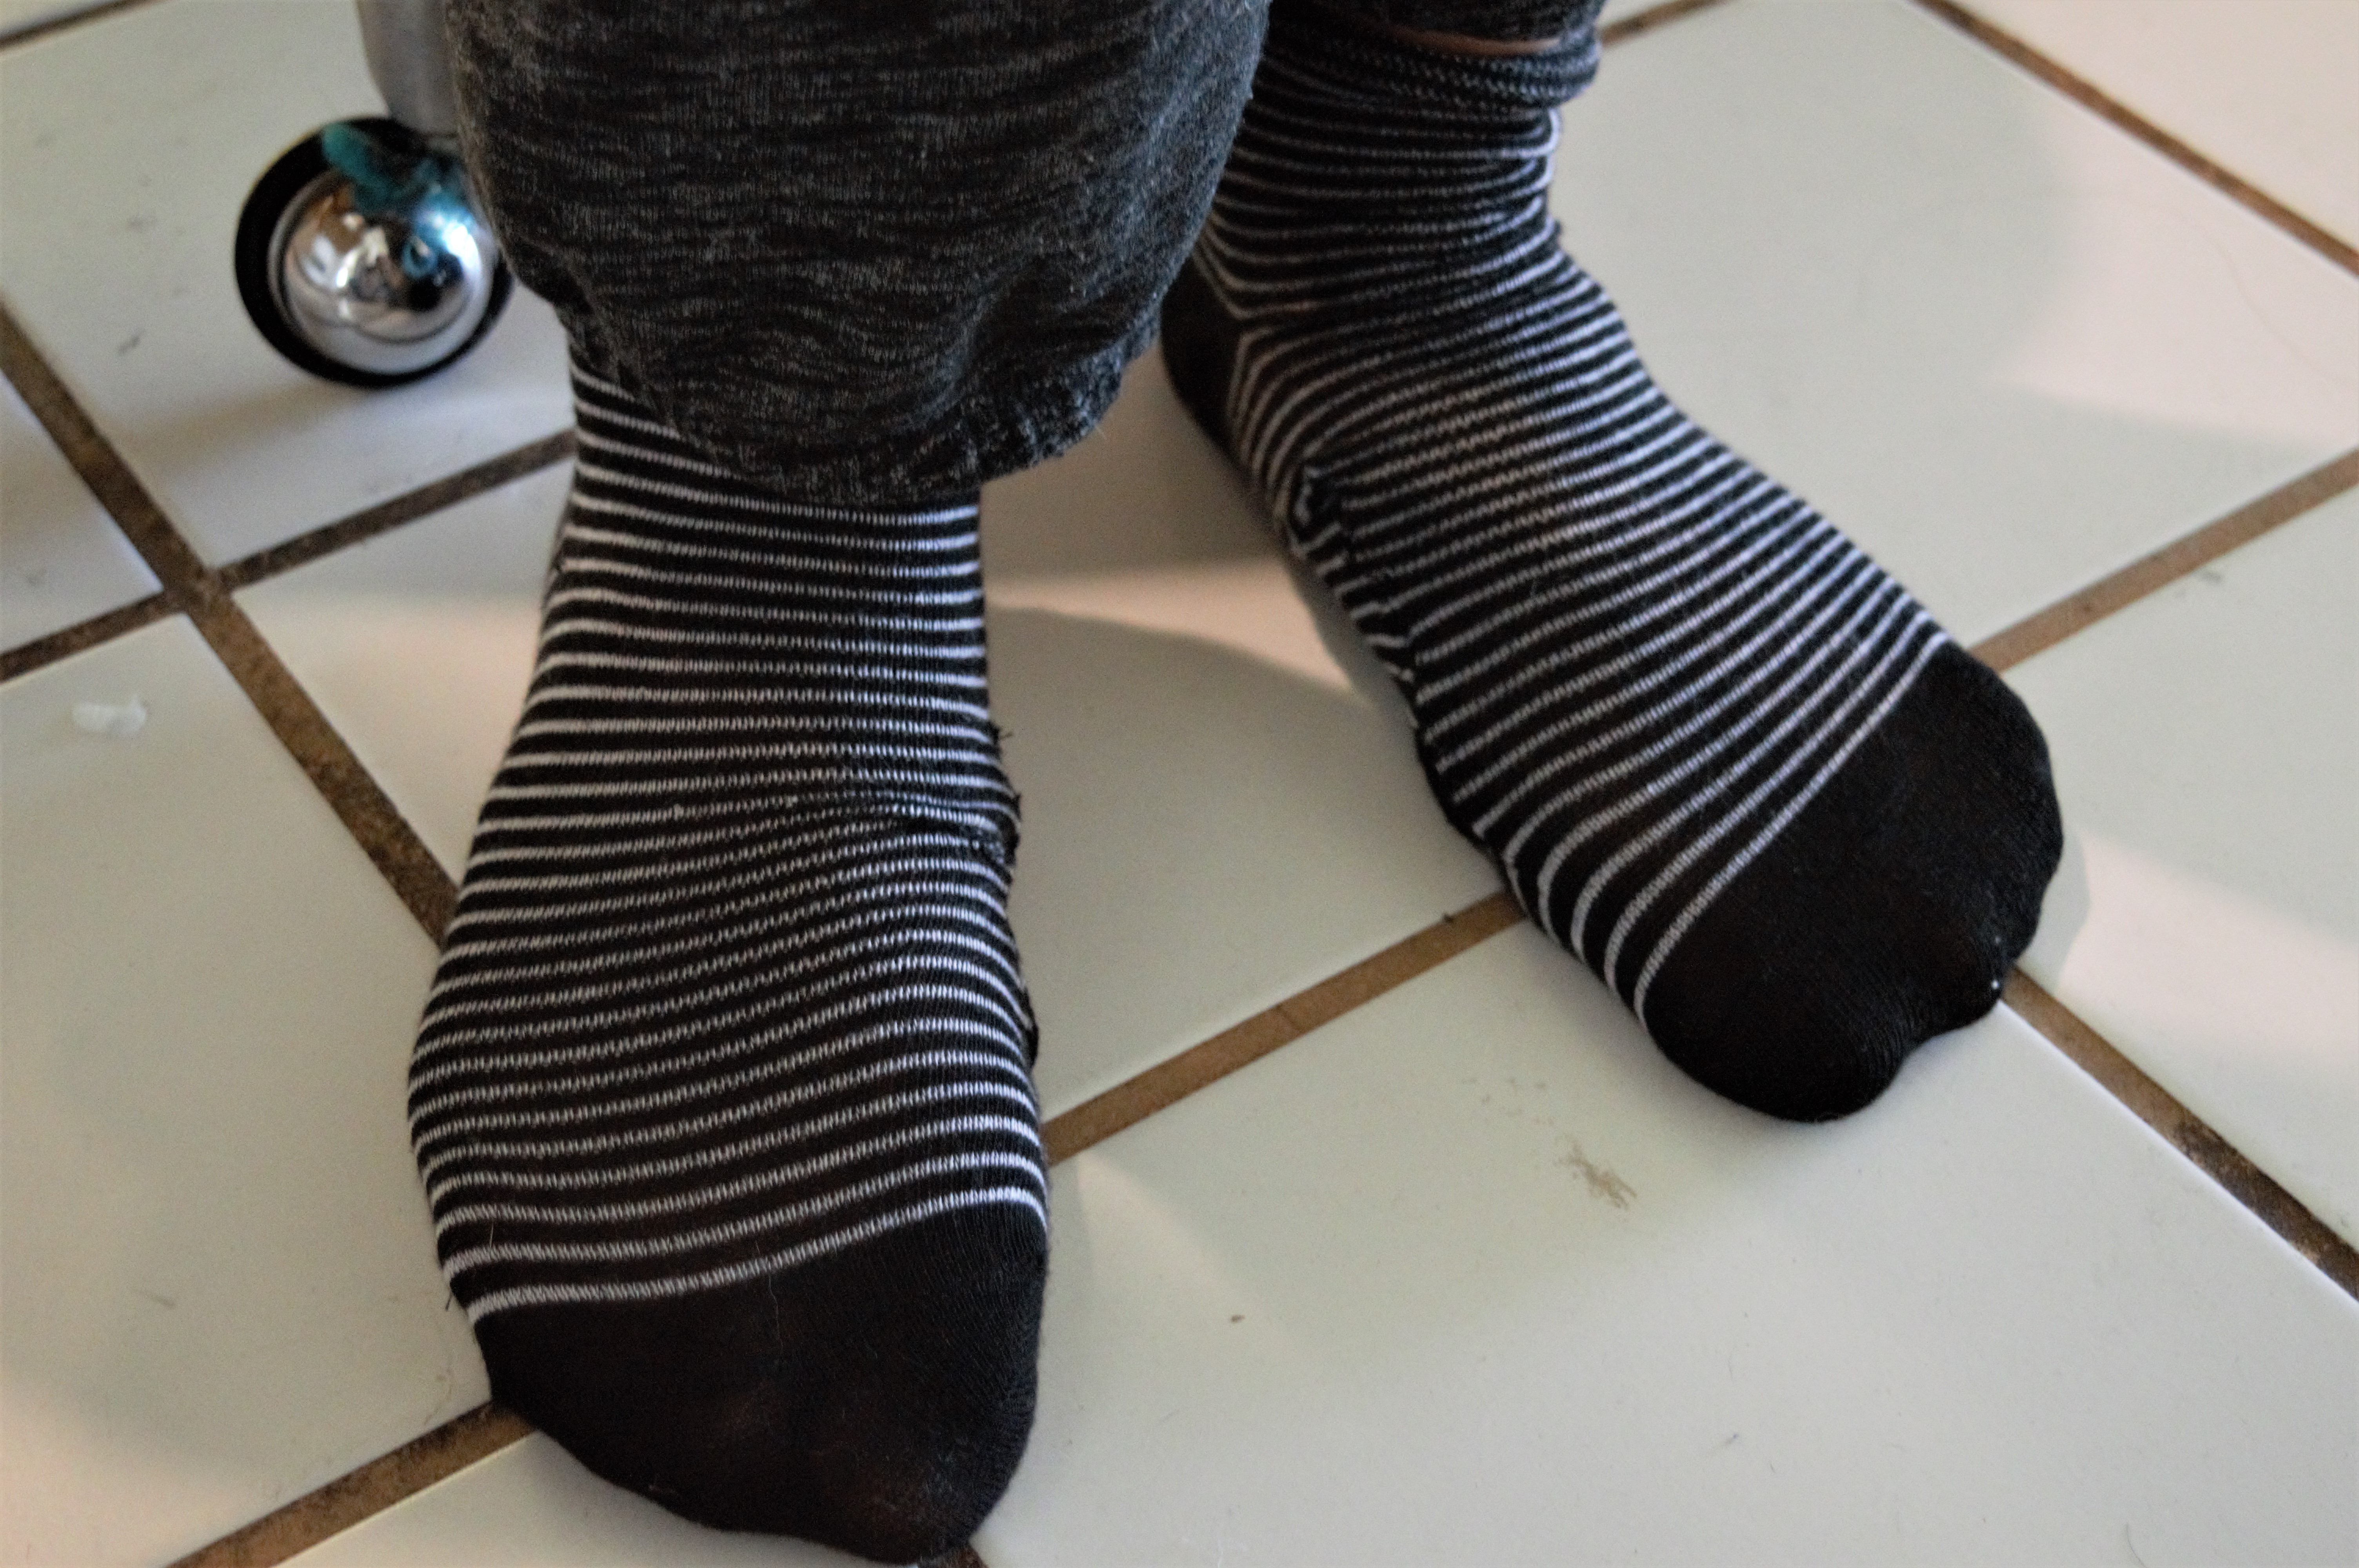 16 put on socks with pants you want to sew them into.jpg